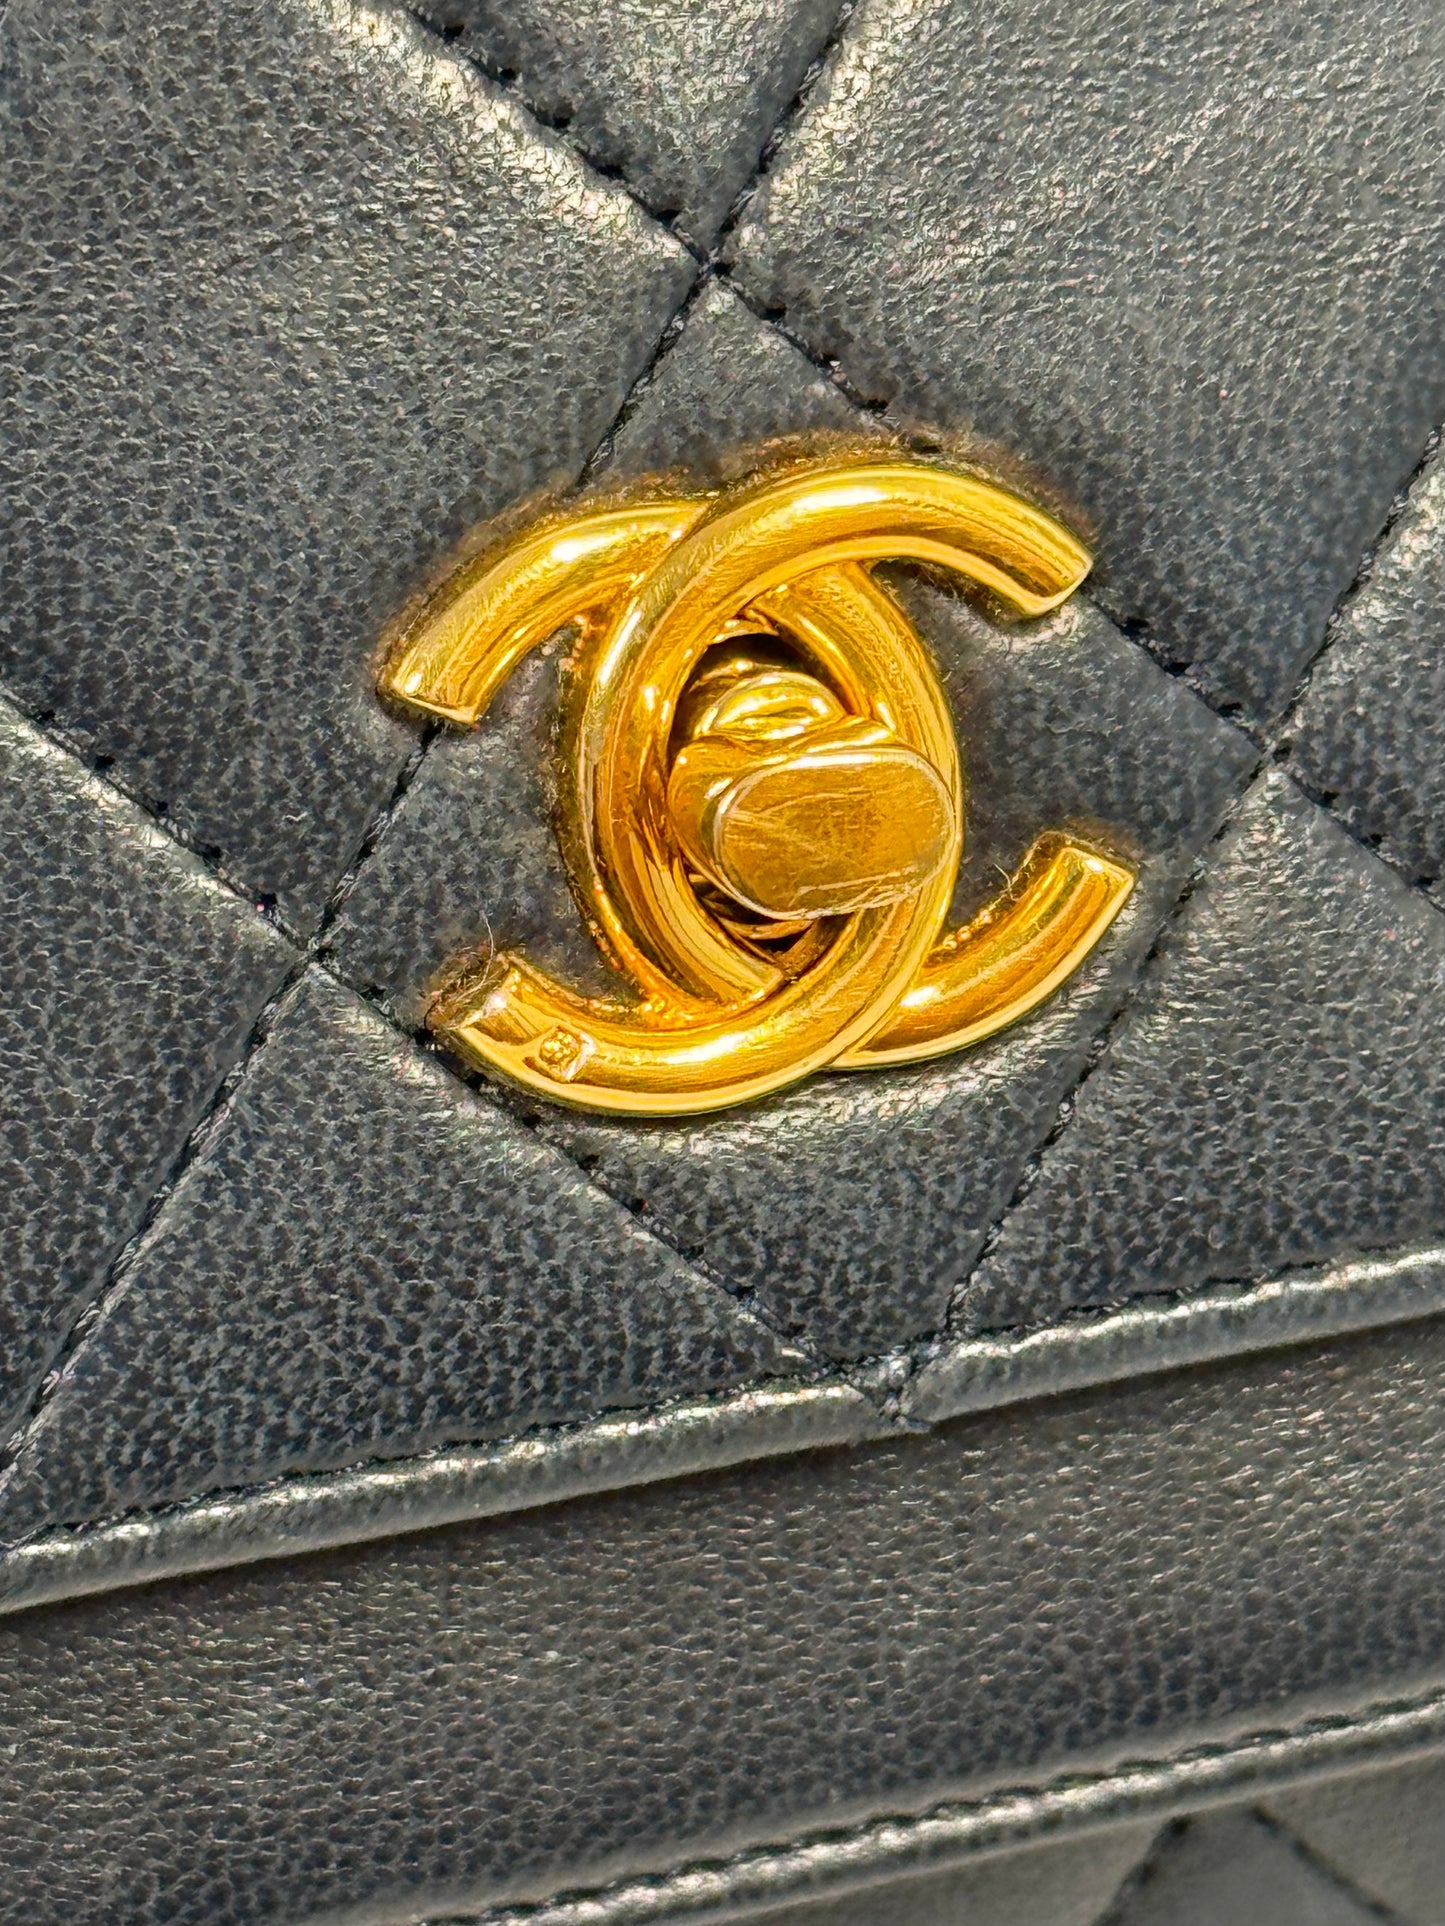 Chanel Vintage Early 80s Navy Blue Quilted Lambskin Half Moon Double Flap Shoulder Bag w 24K Gold Plated Hardware